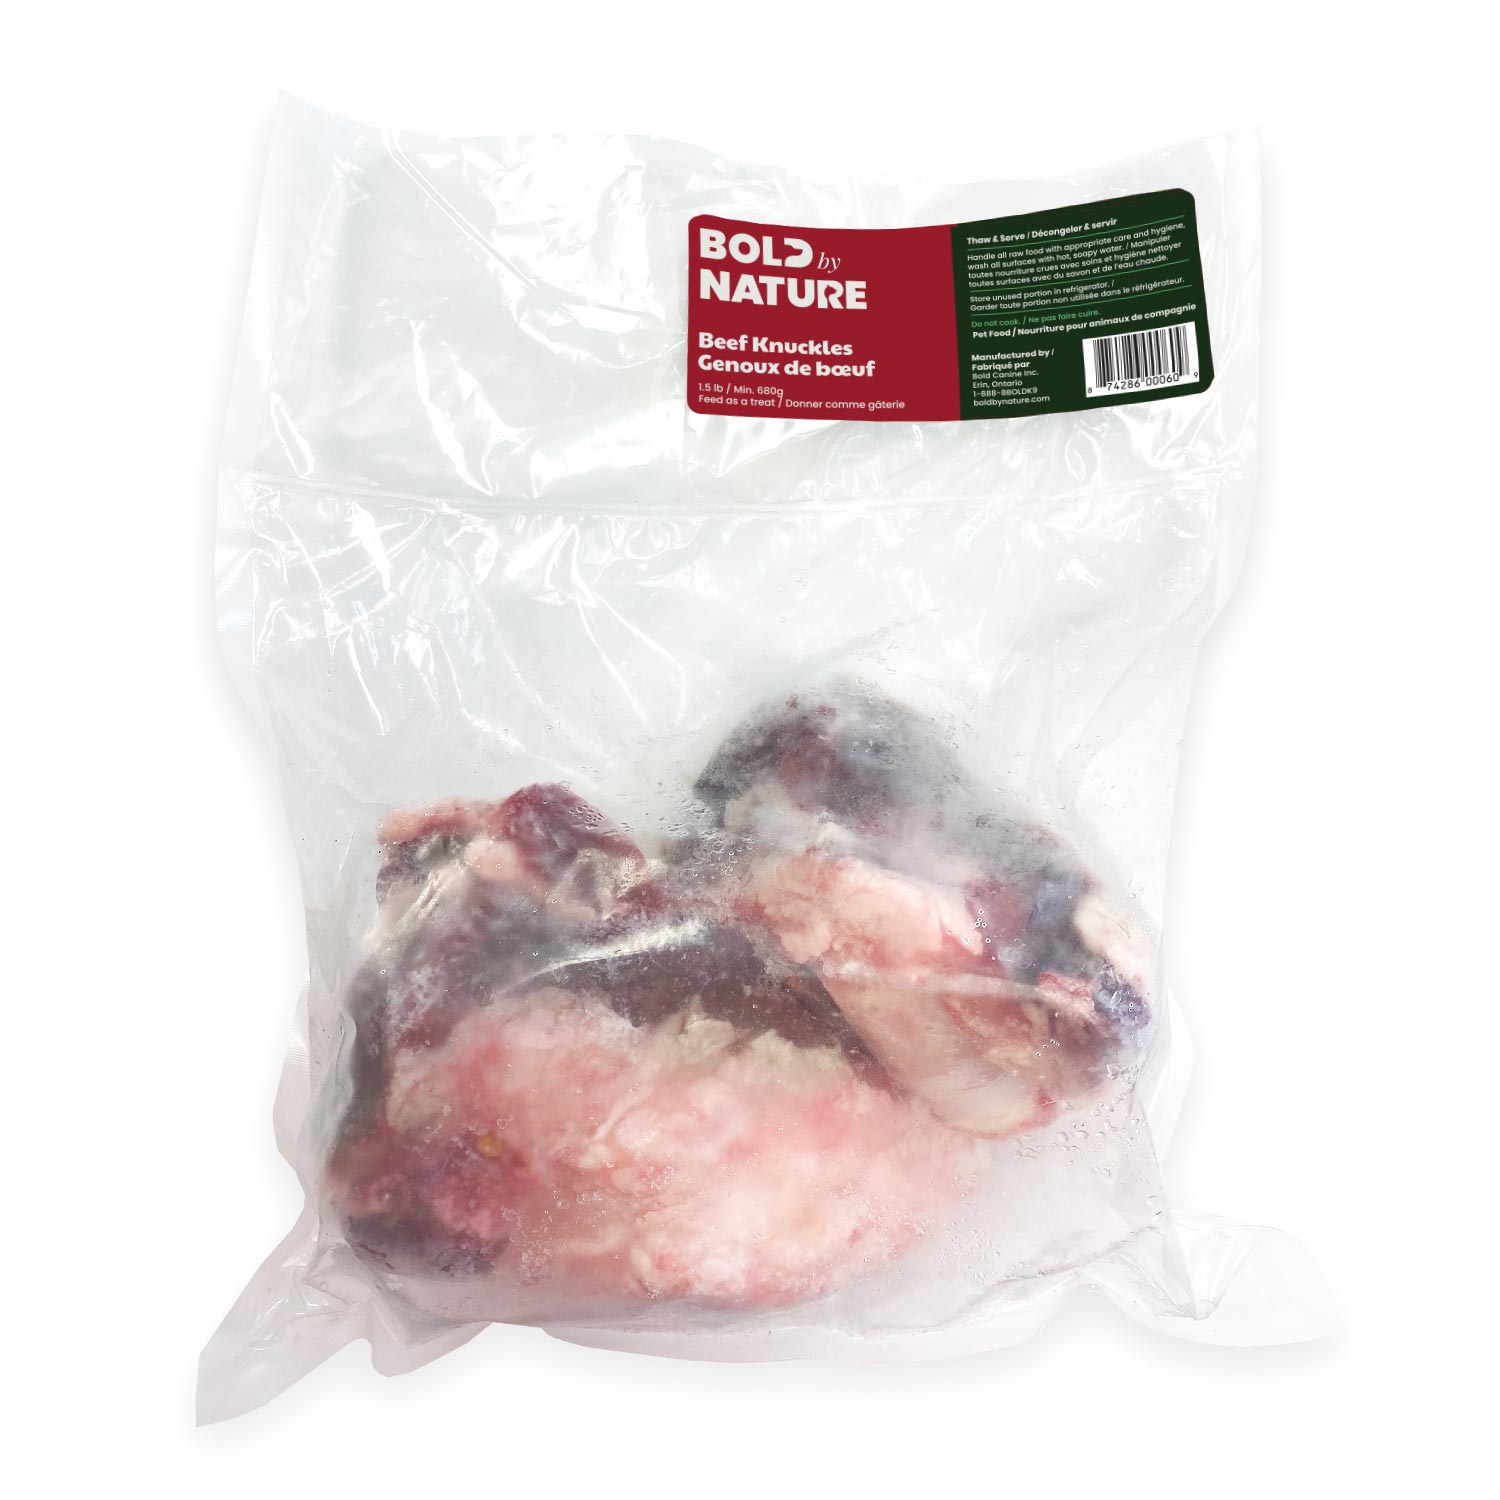 Bold by Nature - Beef Knuckles - Frozen Product